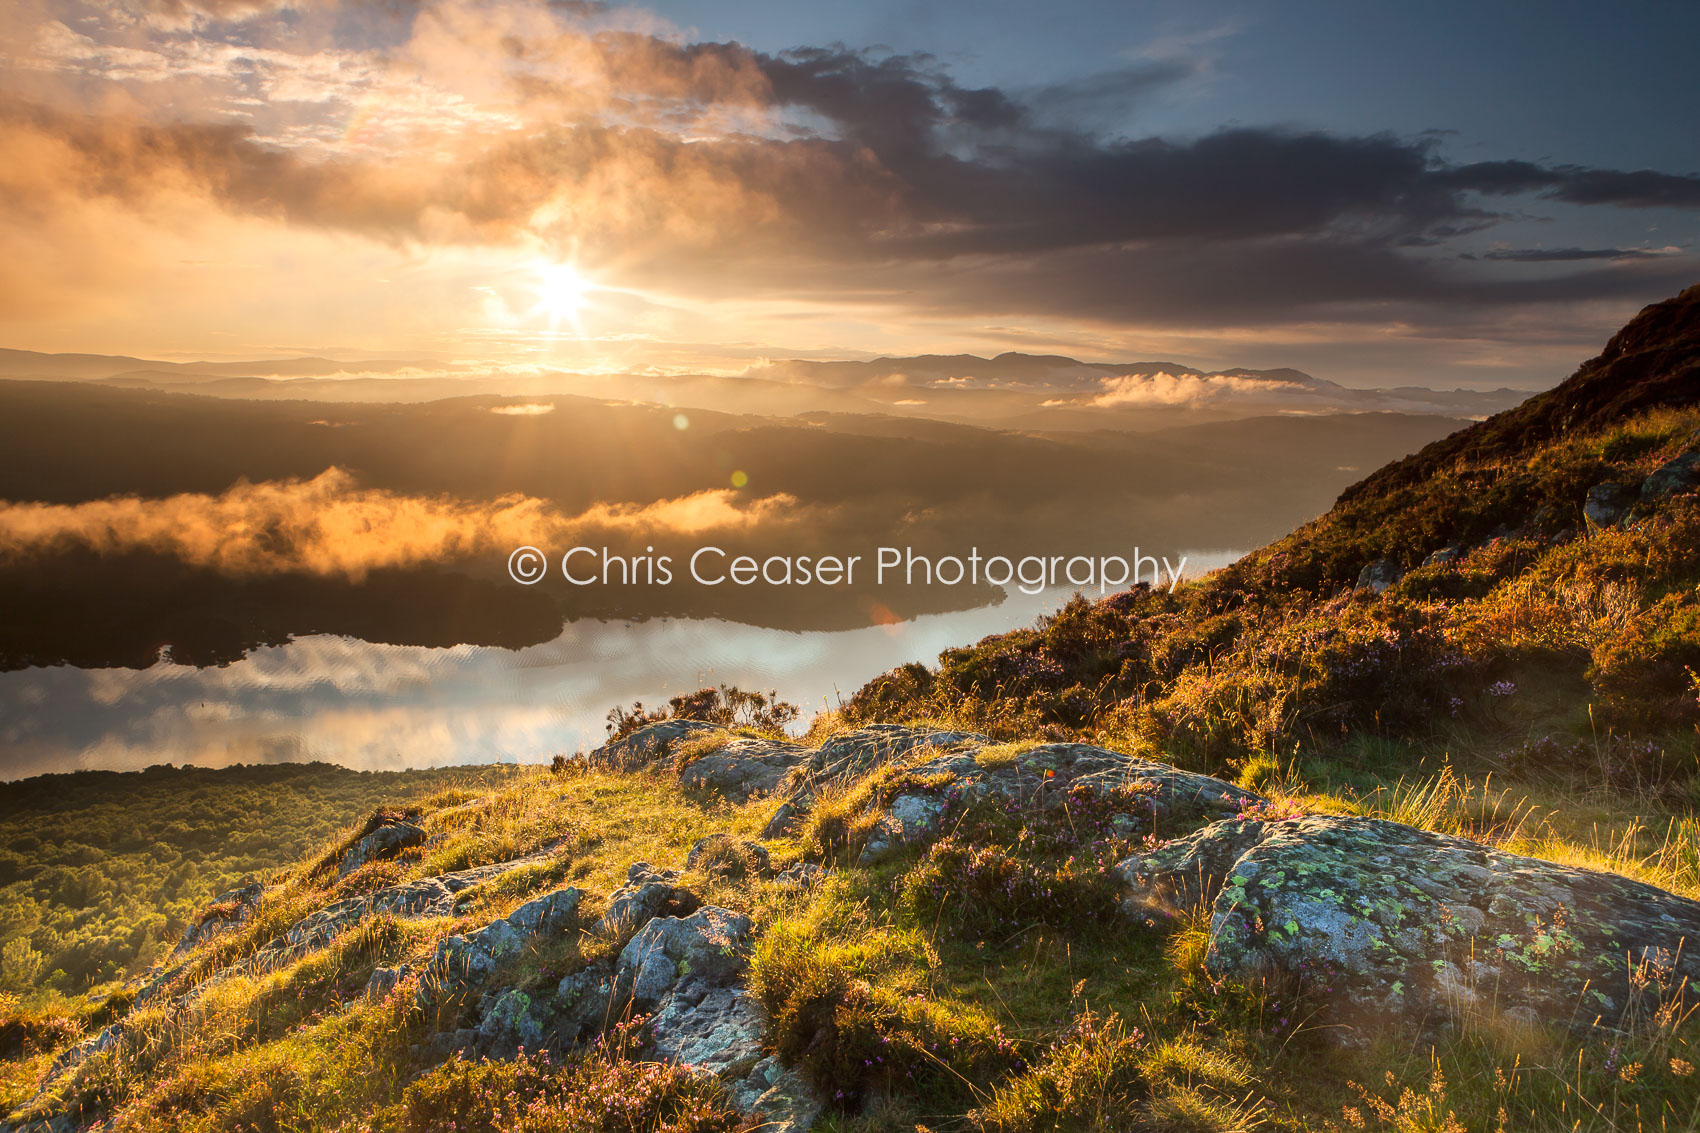 Above The Clouds, Windermere